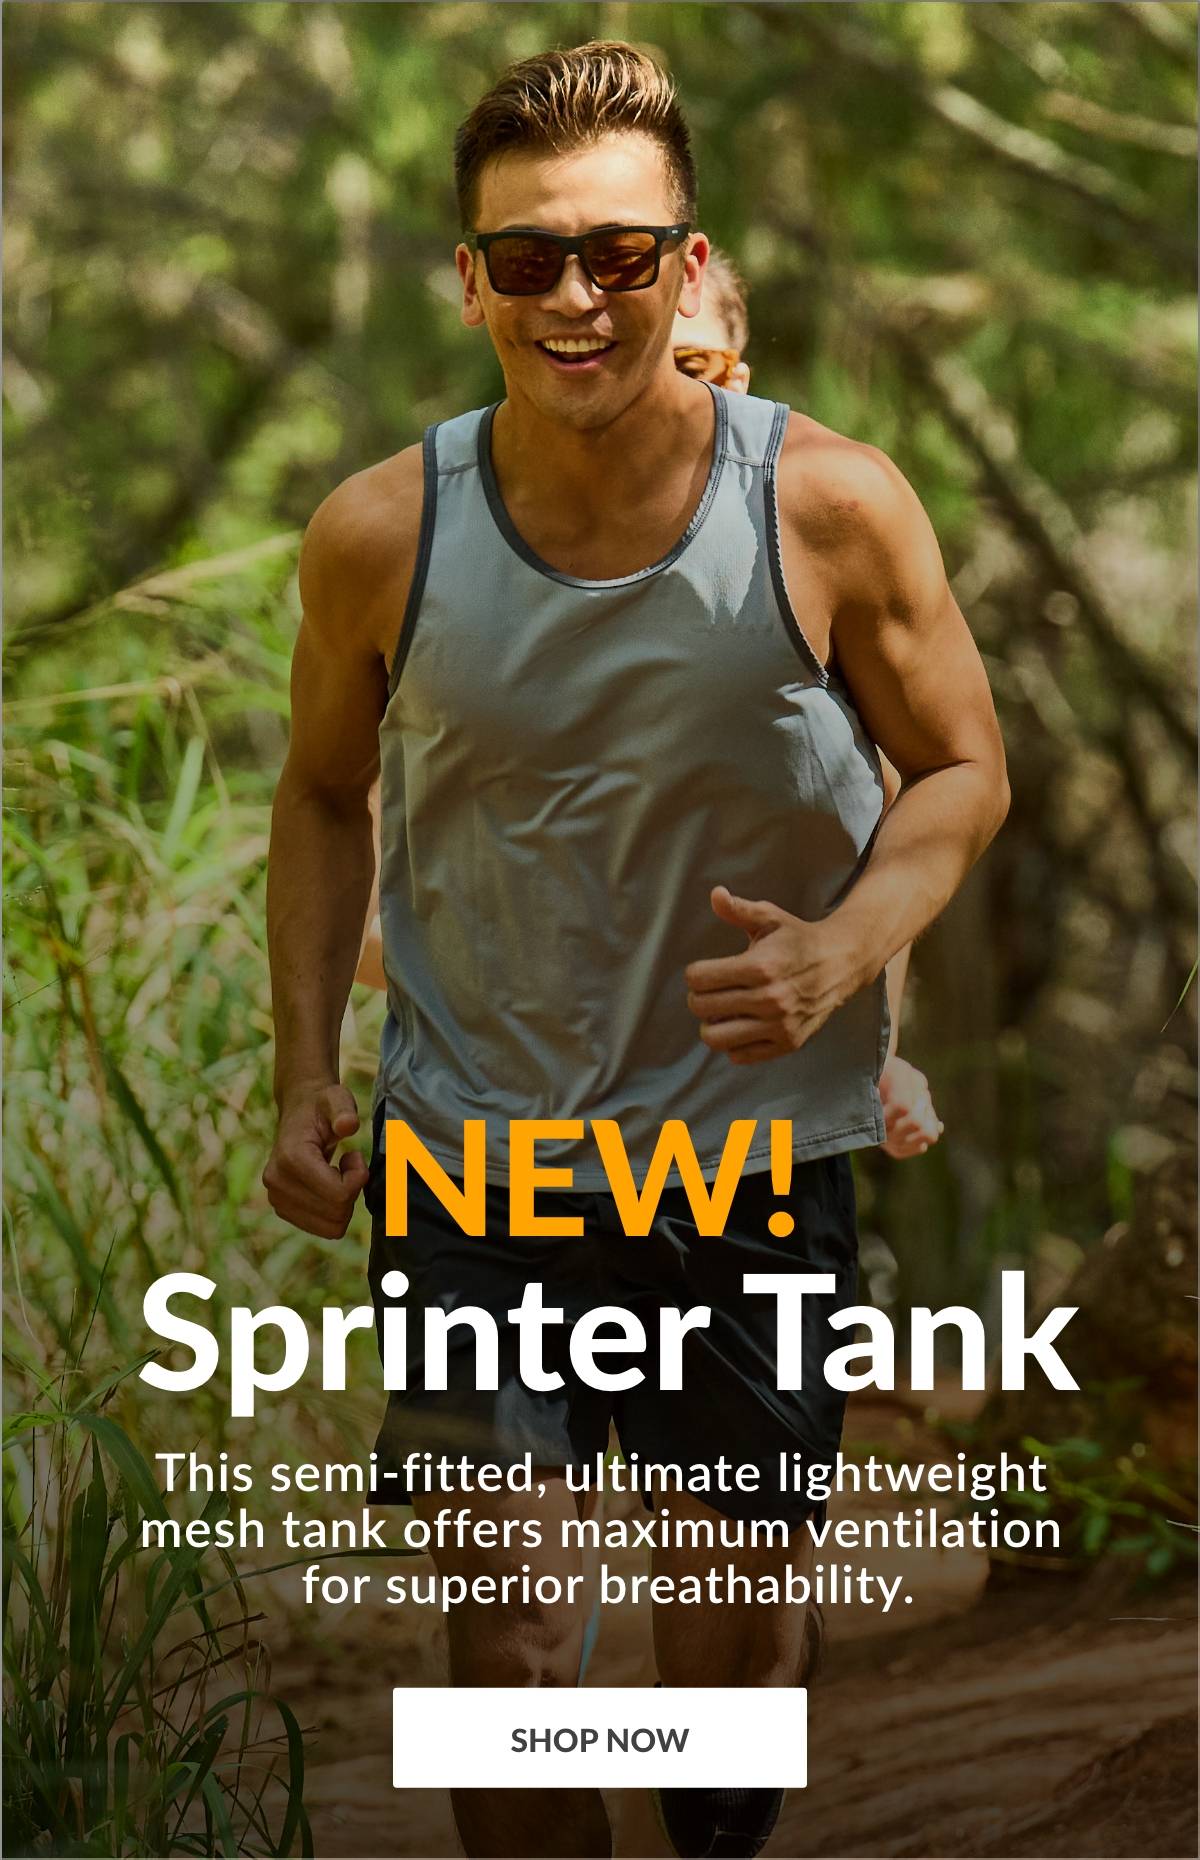 NEW! Sprinter Tank. This semi-fitted, ultimate lightweight mesh tank offers maximum ventilation for superior breathability. SHOP NOW